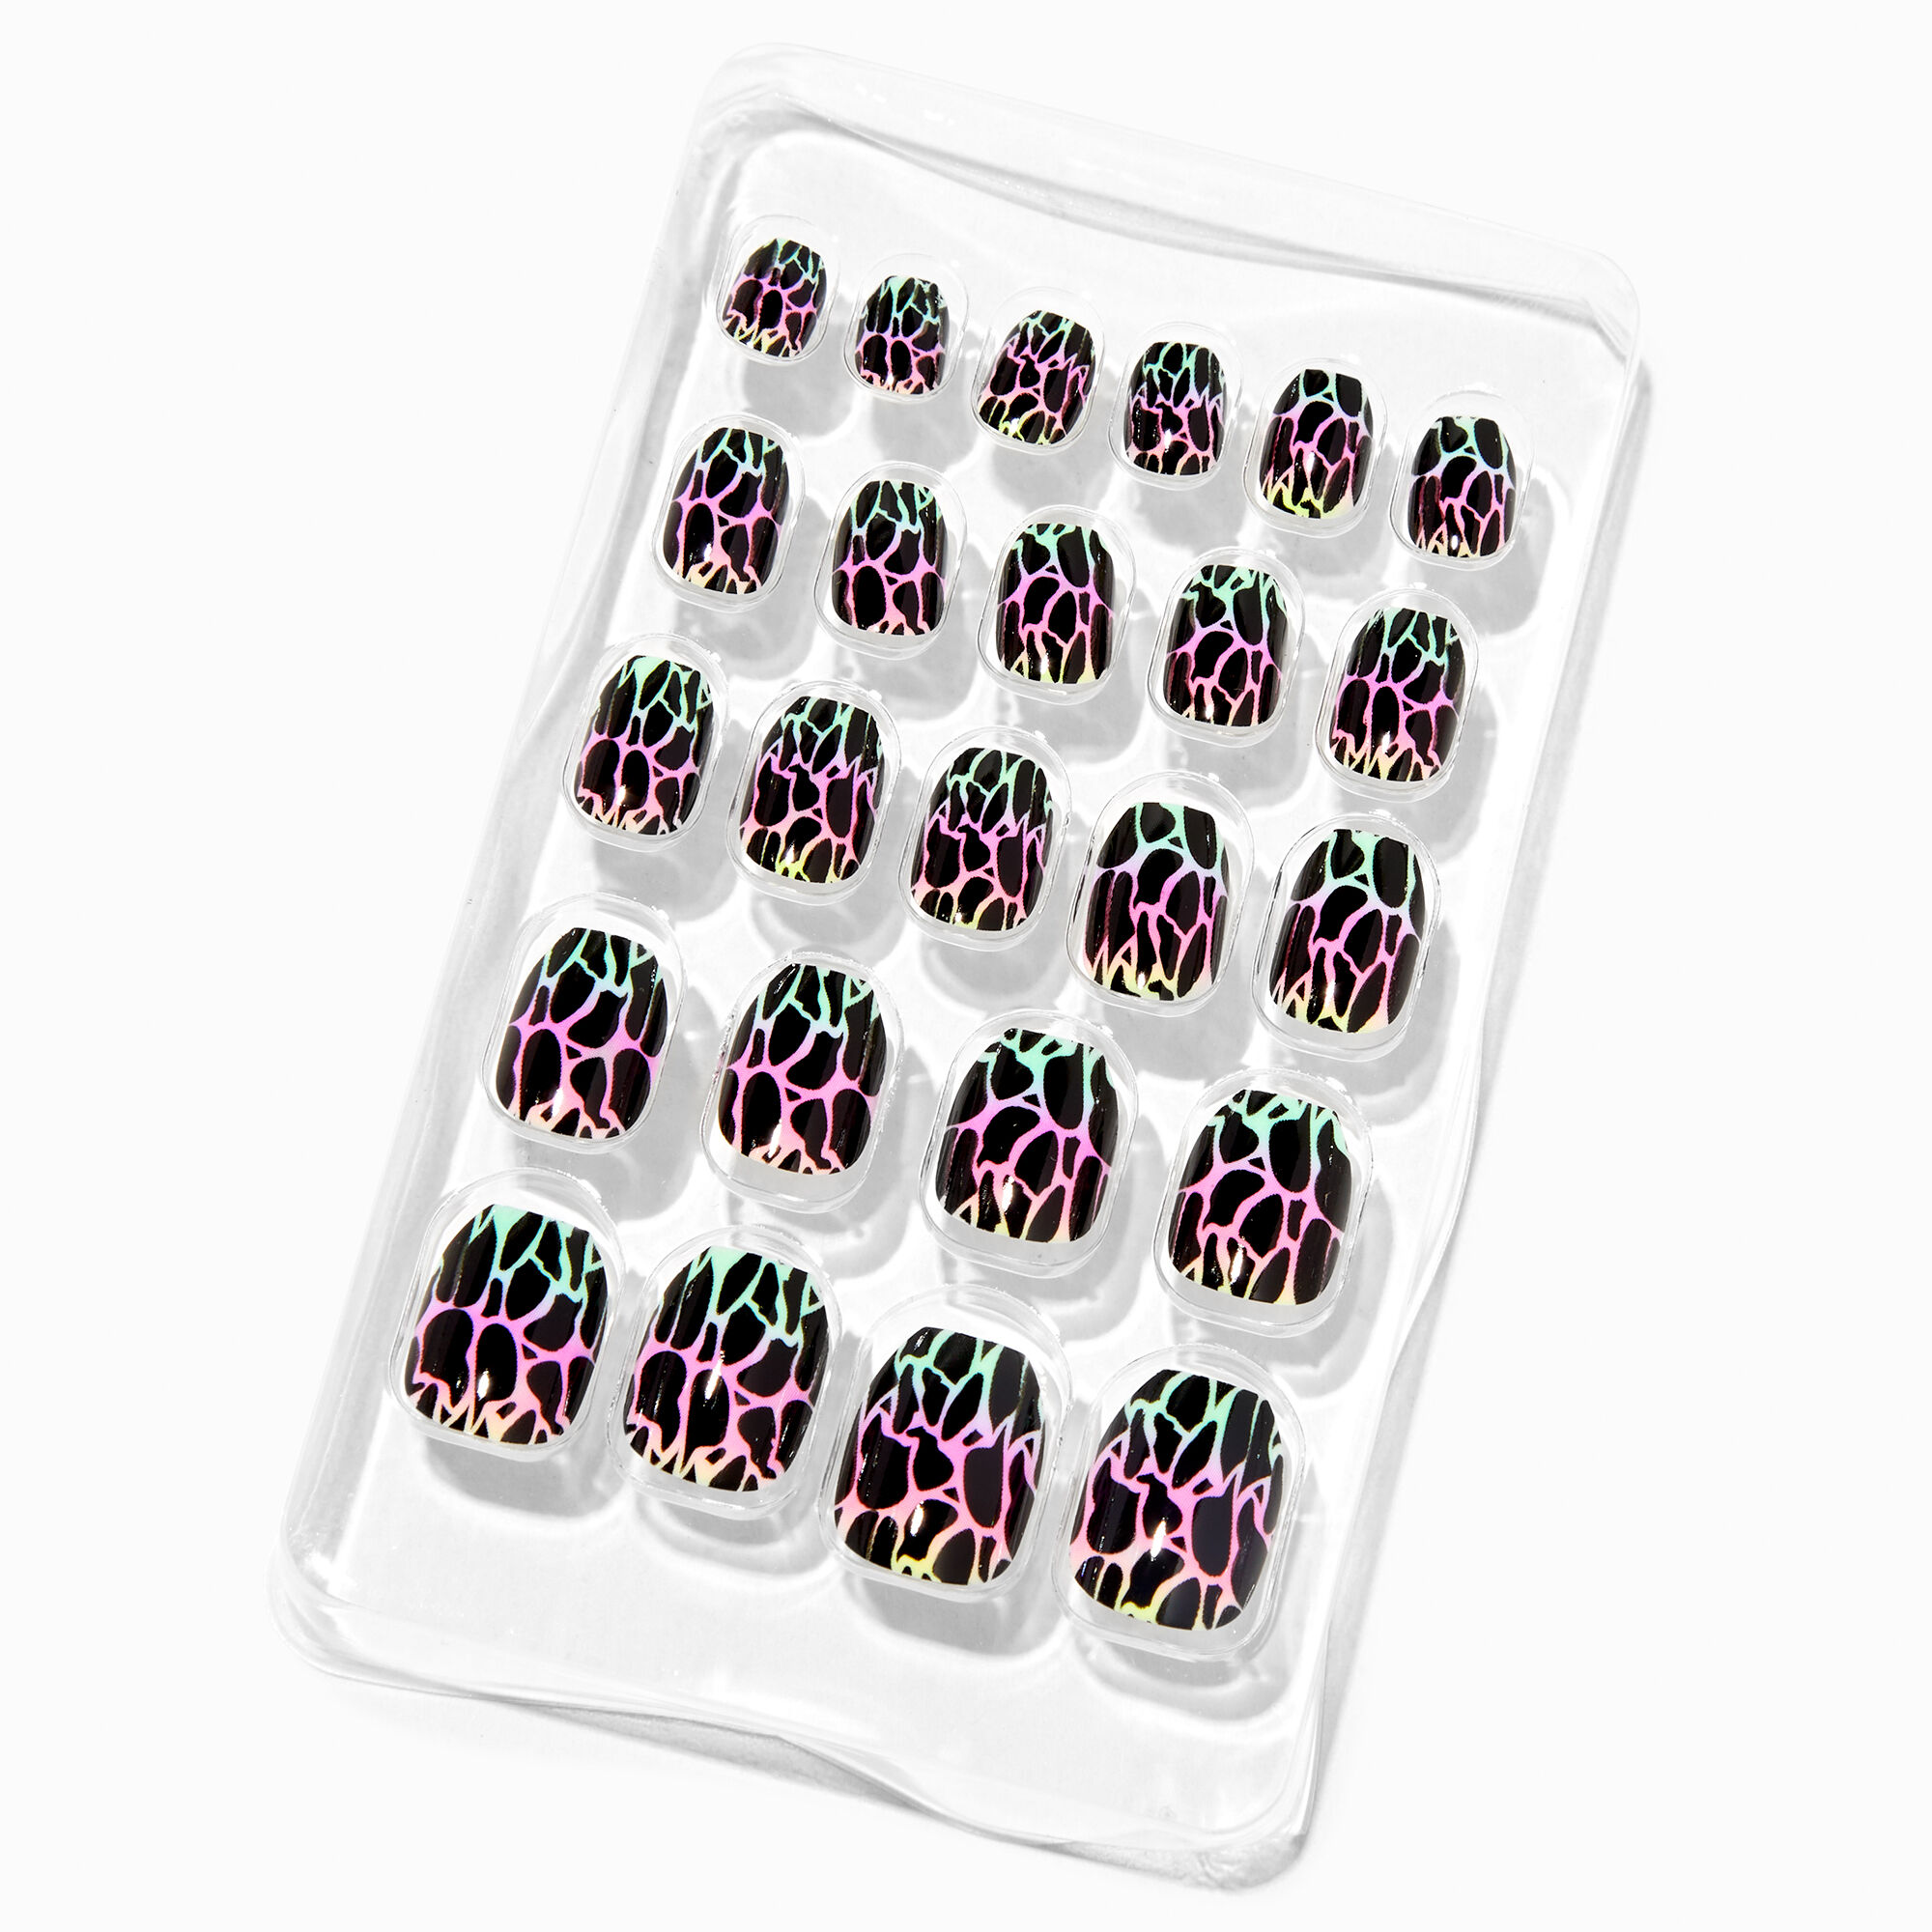 View Claires Crackle Square Press On Vegan Faux Nail Set 24 Pack Rainbow information